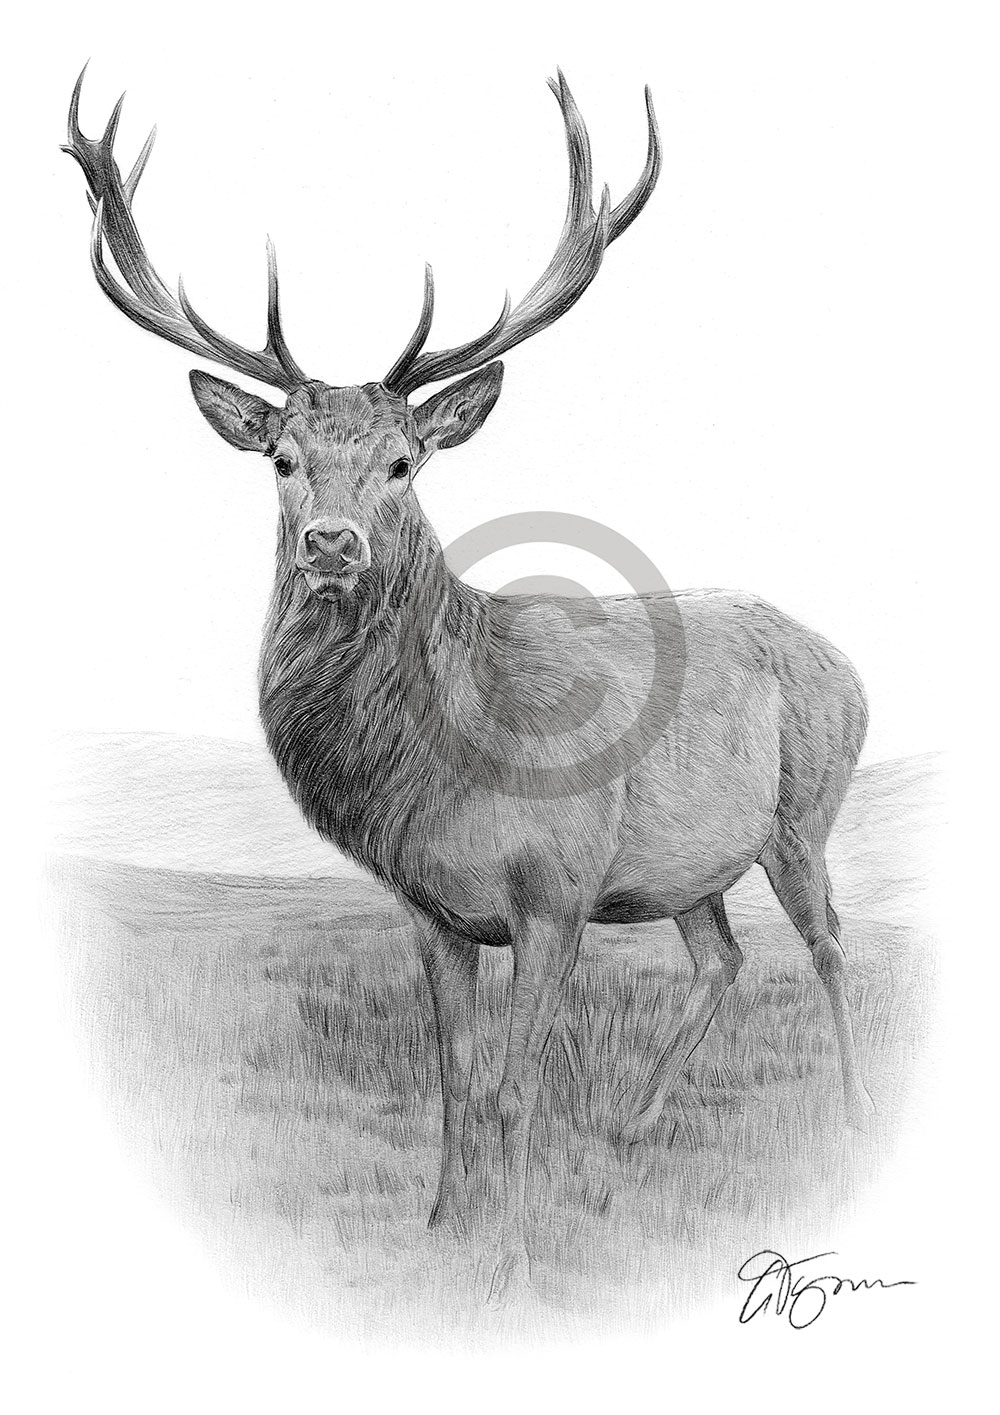 Pencil drawing of a stag by artist Gary Tymon